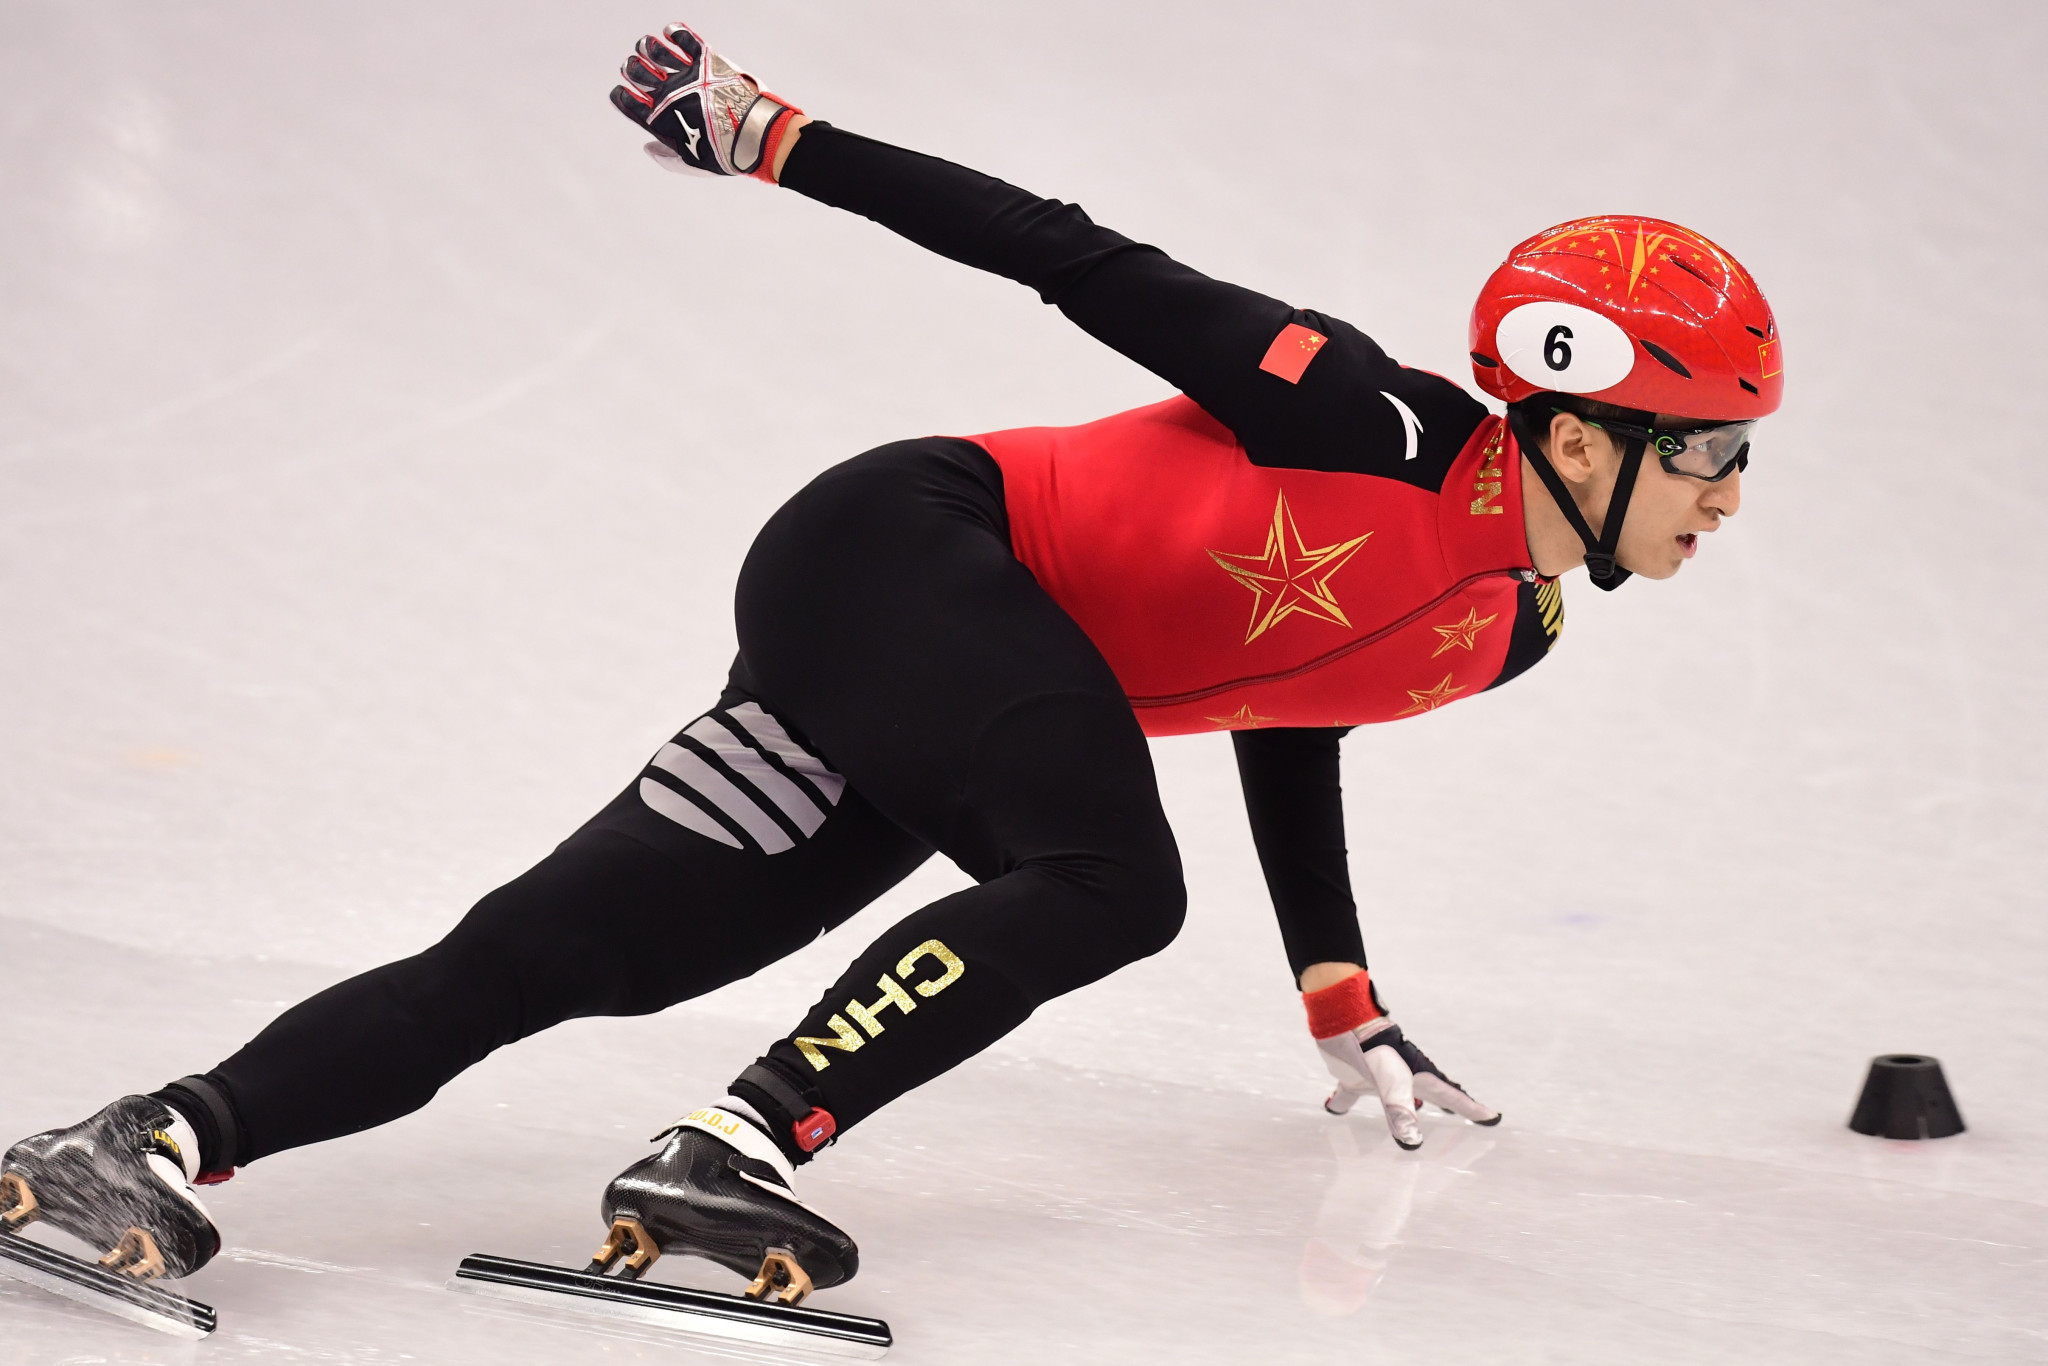 China's Wu Dajing twice broke the world record on his way to winning the men's 500 metres short track speed skating event ©Getty Images